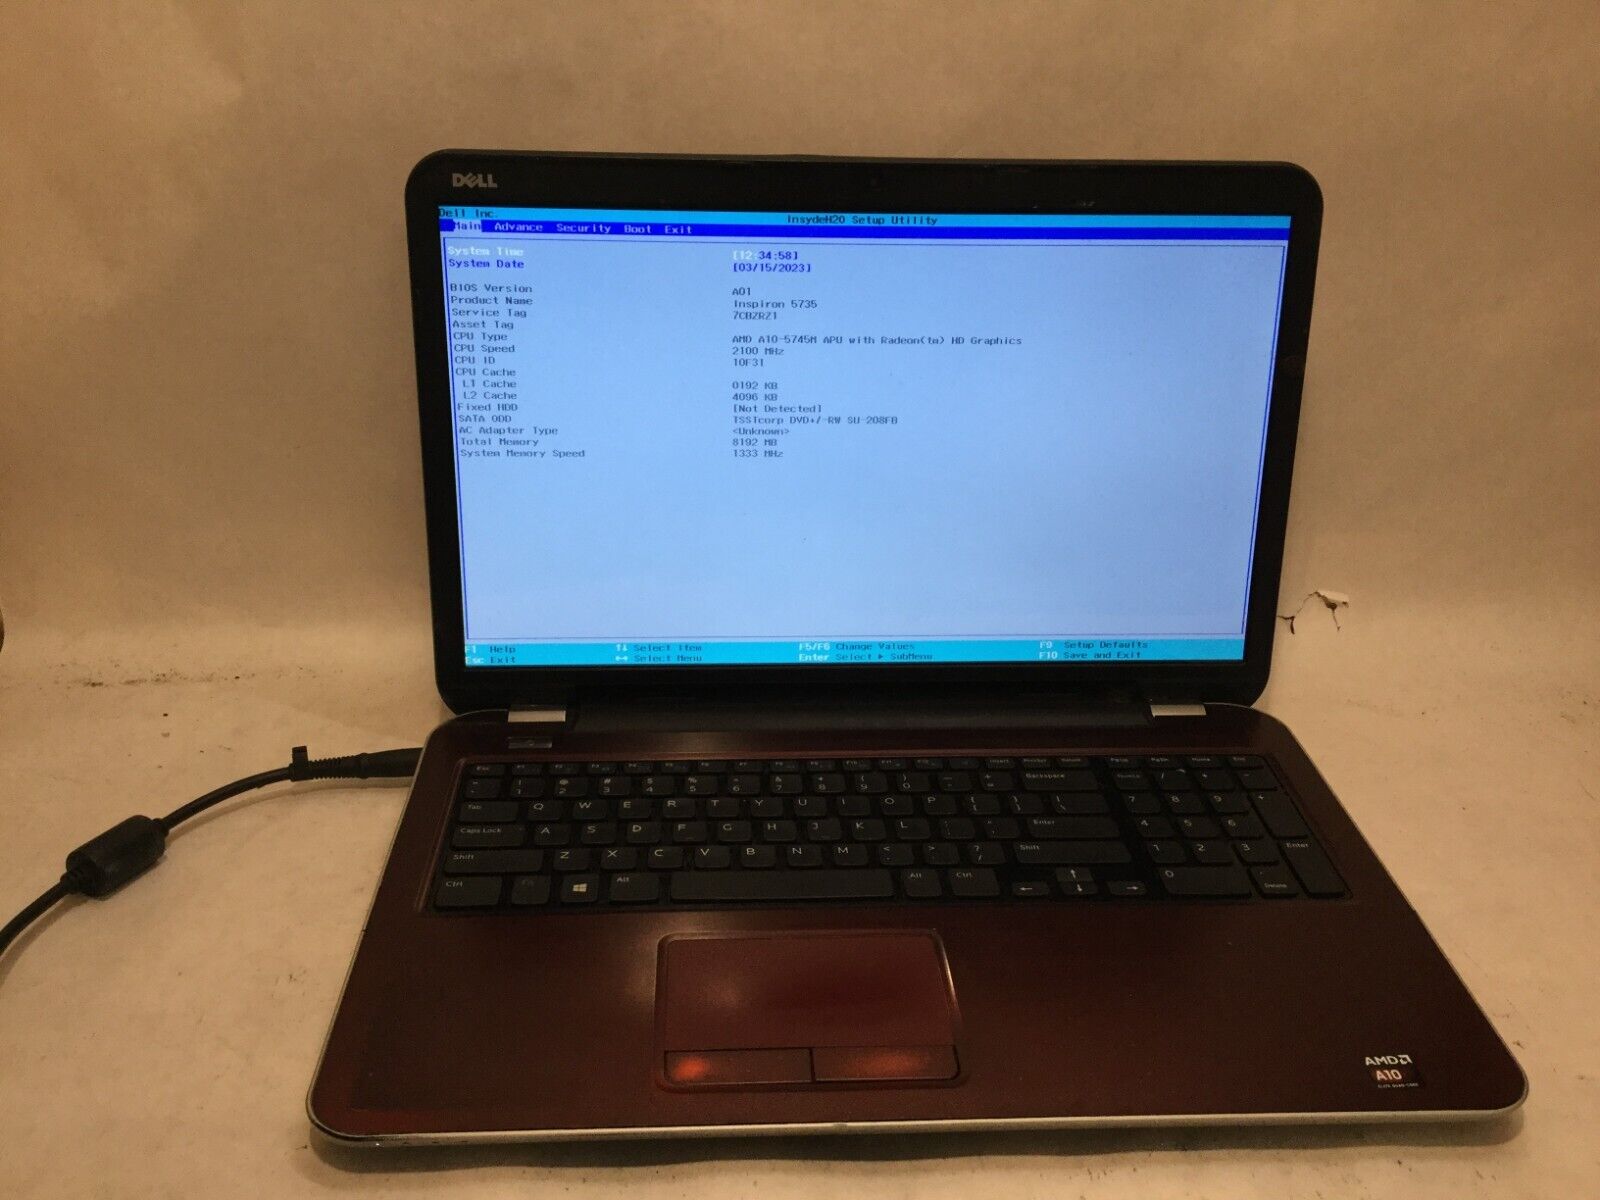 Dell Inspiron M731R-5735 / AMD A10-5745M @ 2.10GHz / (MISSING PARTS) -MR